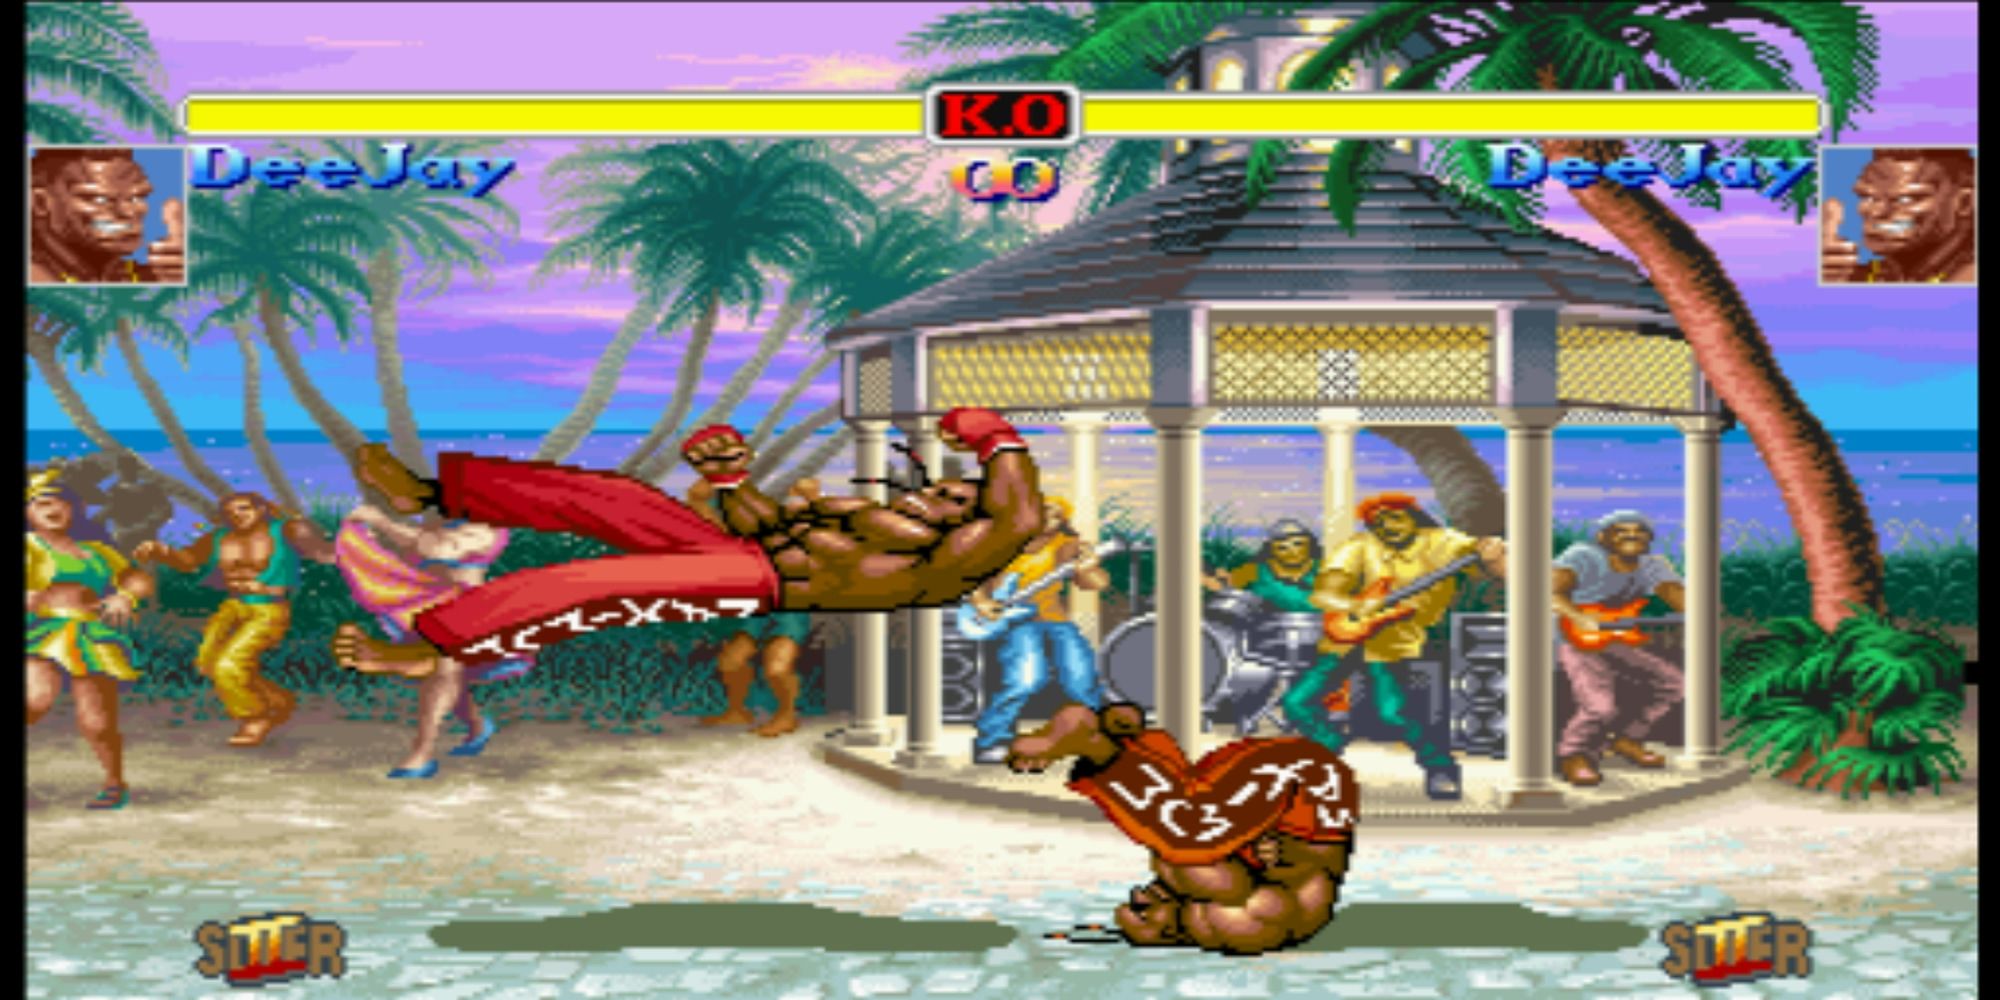 Super SF2 Deejay throws Deejay into the air in Jamaica in Hyper Street Fighter 2.